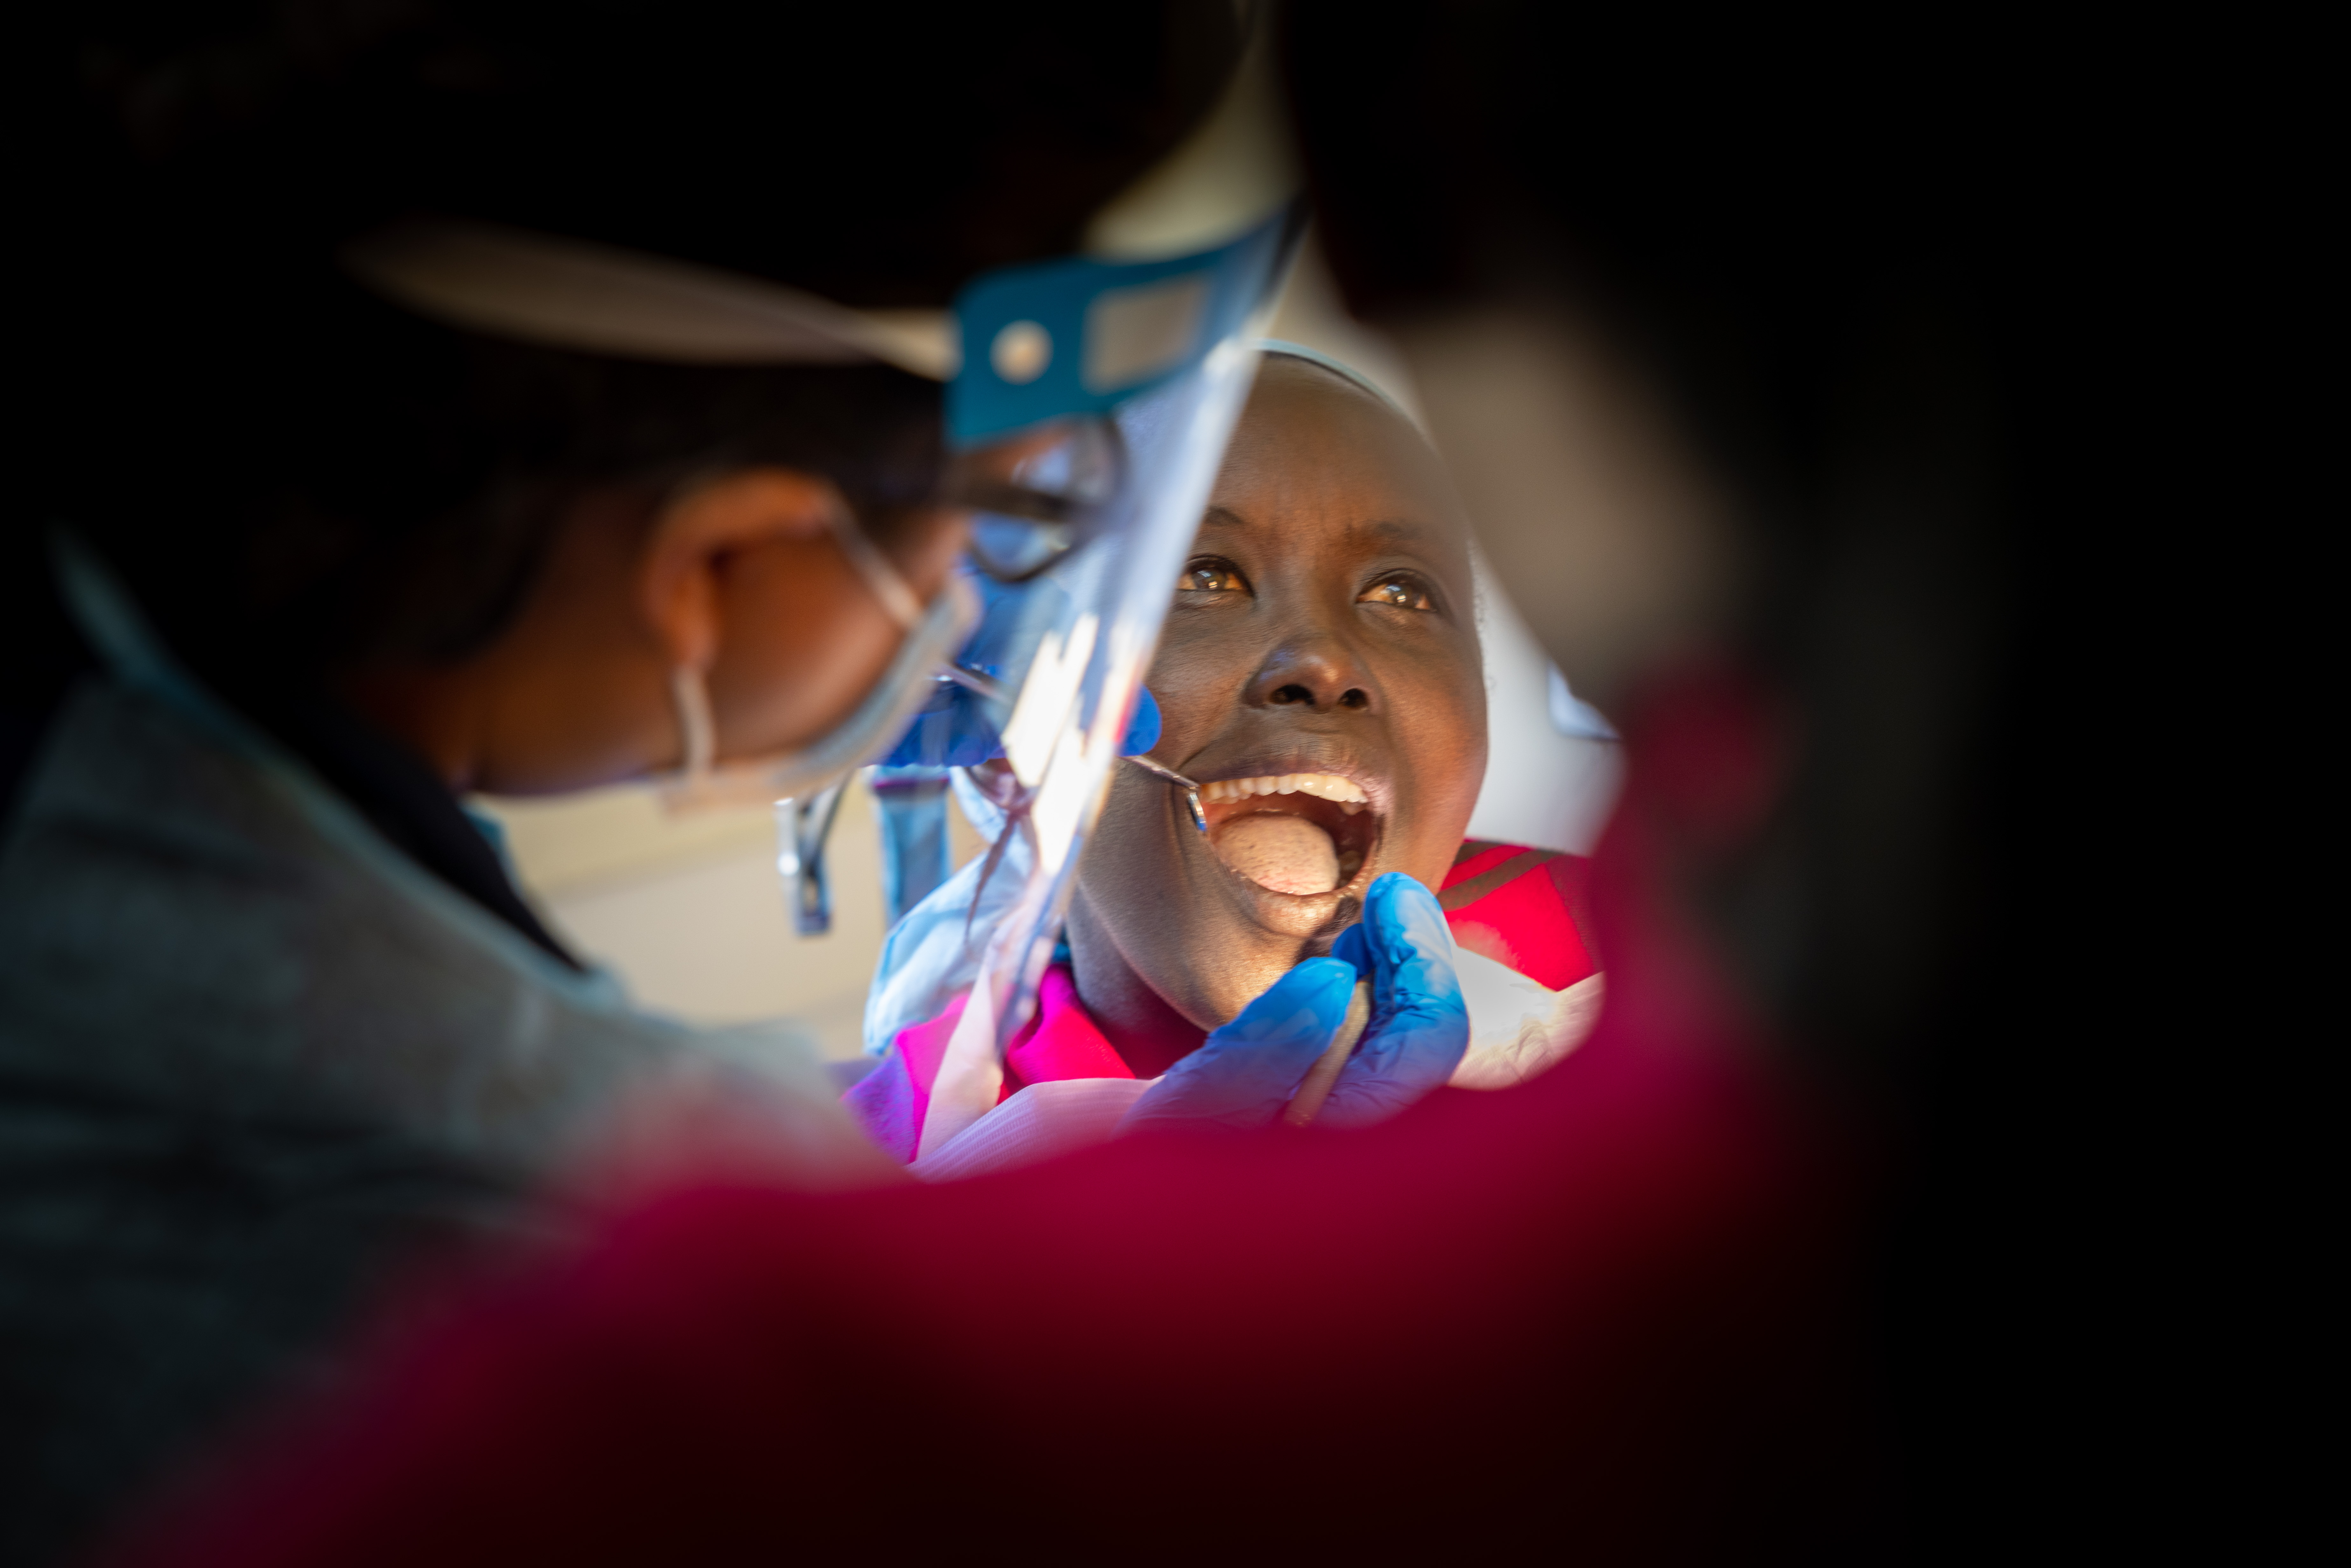 Medical personnel inspect a person's teeth